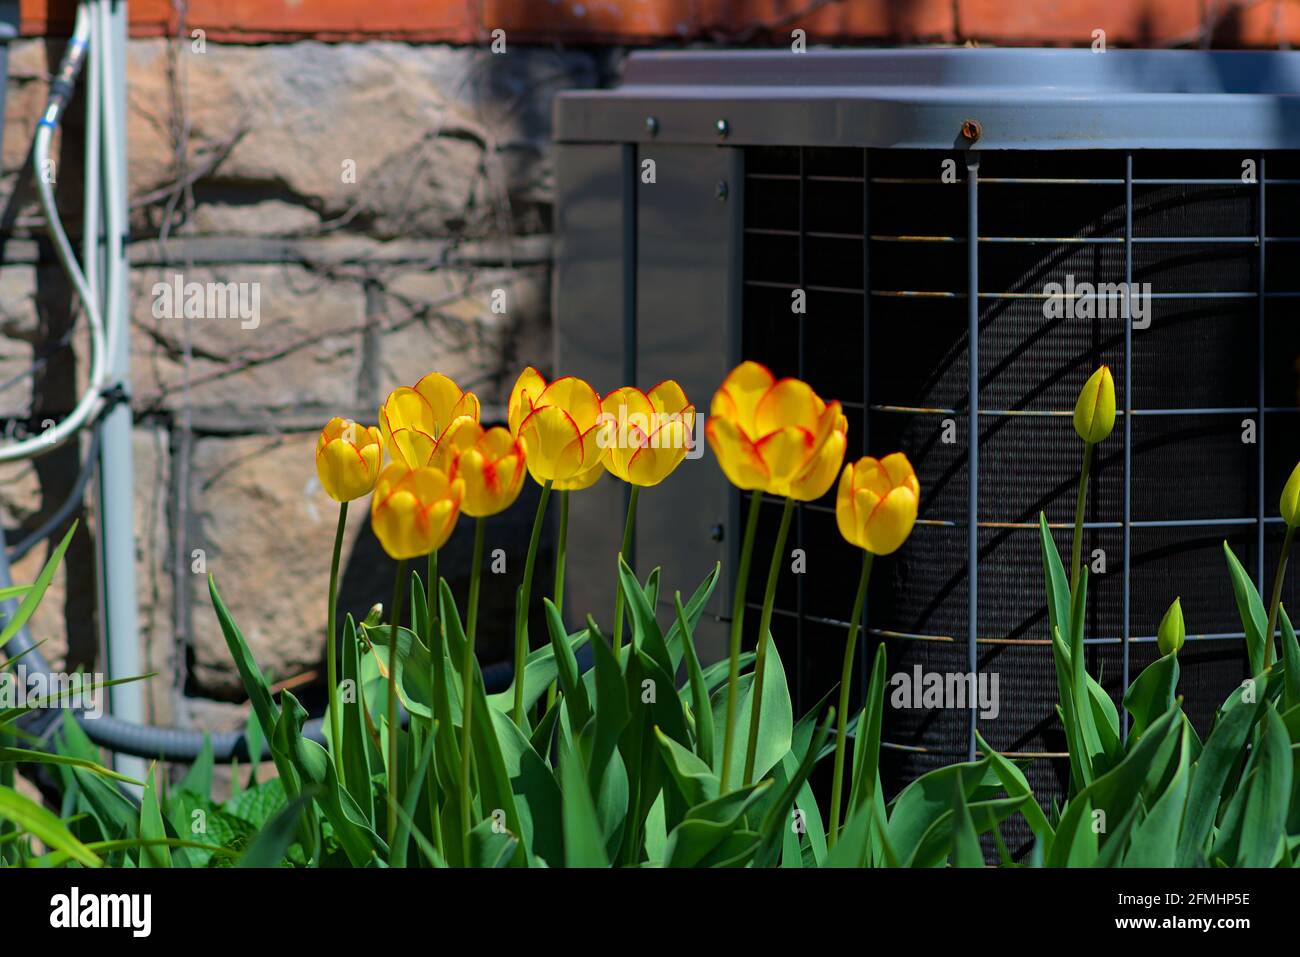 Yellow tulips (unknown cultivar) with red edge blooming in front of an air conditioner in a Glebe garden in late spring in Ottawa, Ontario, Canada. Stock Photo